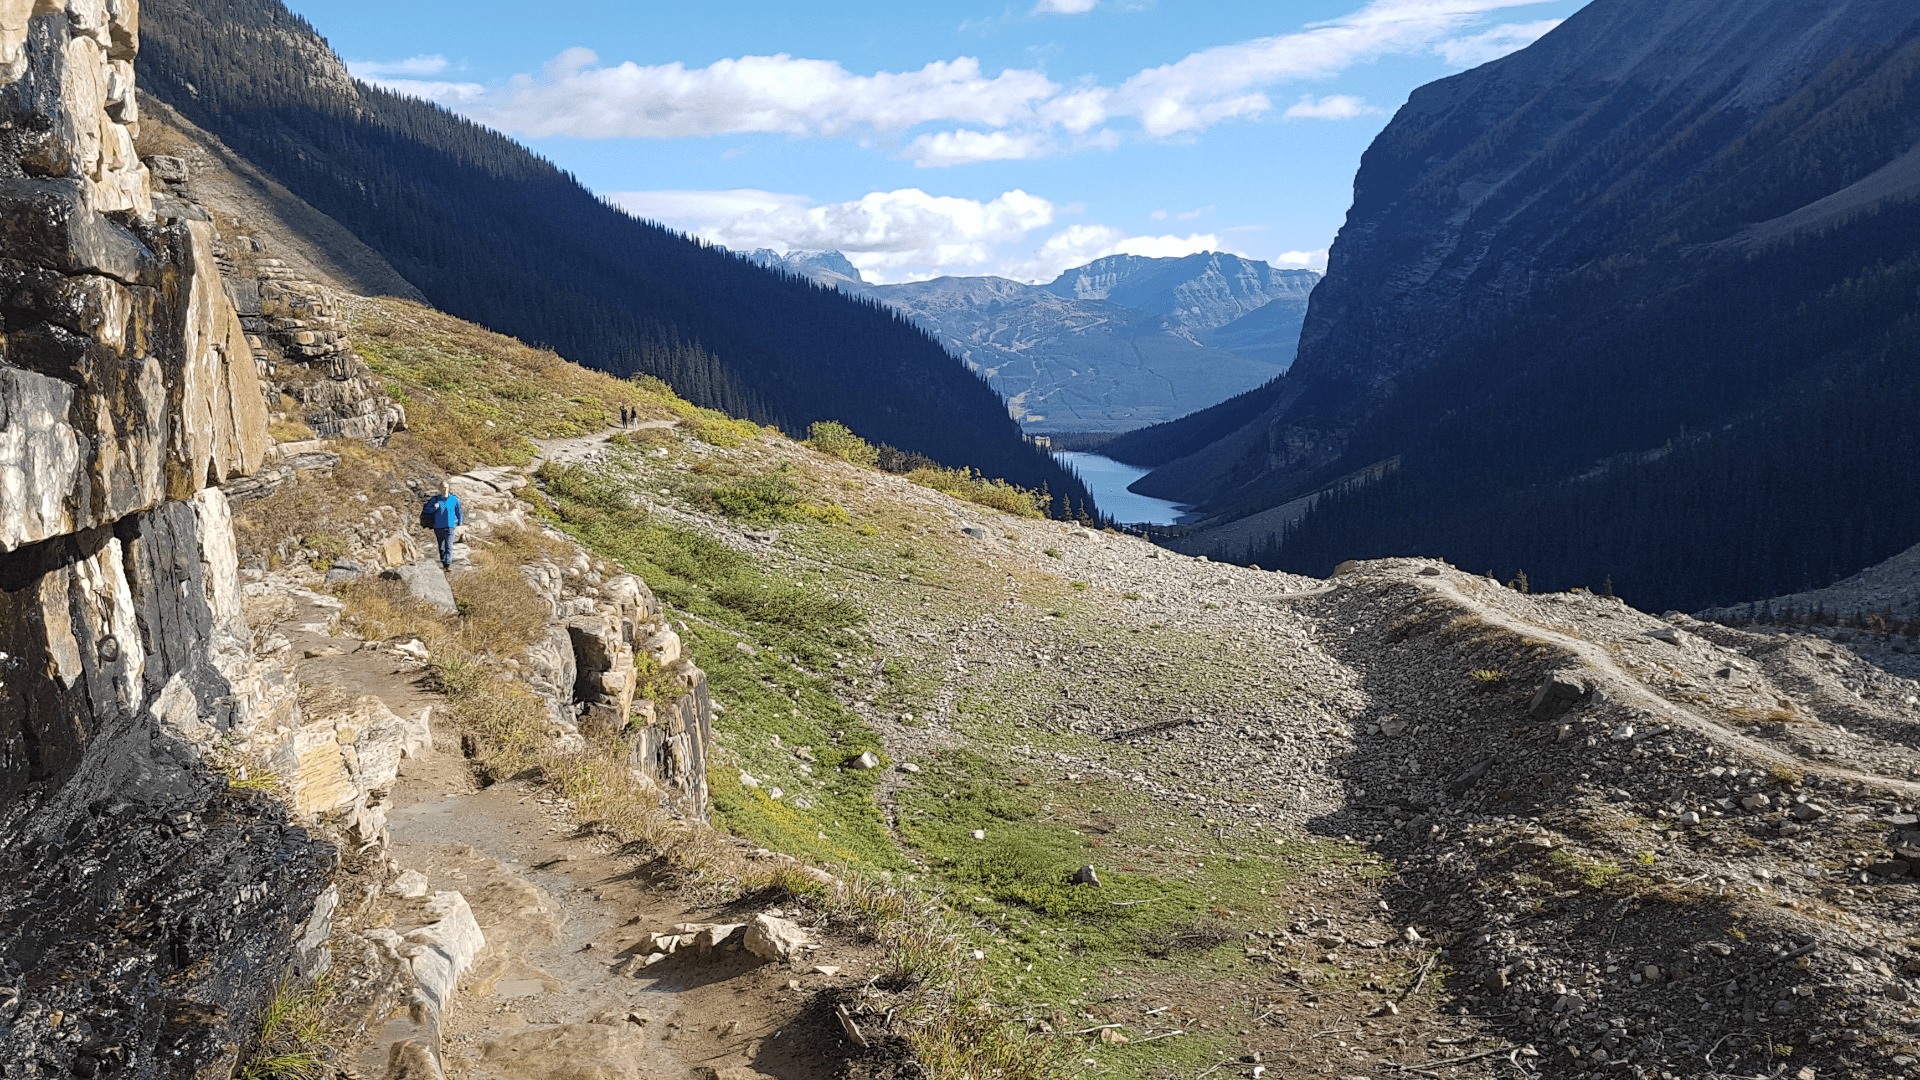 Hiking trail to mountain hills from Lake Louise. The lake is visible at the background.